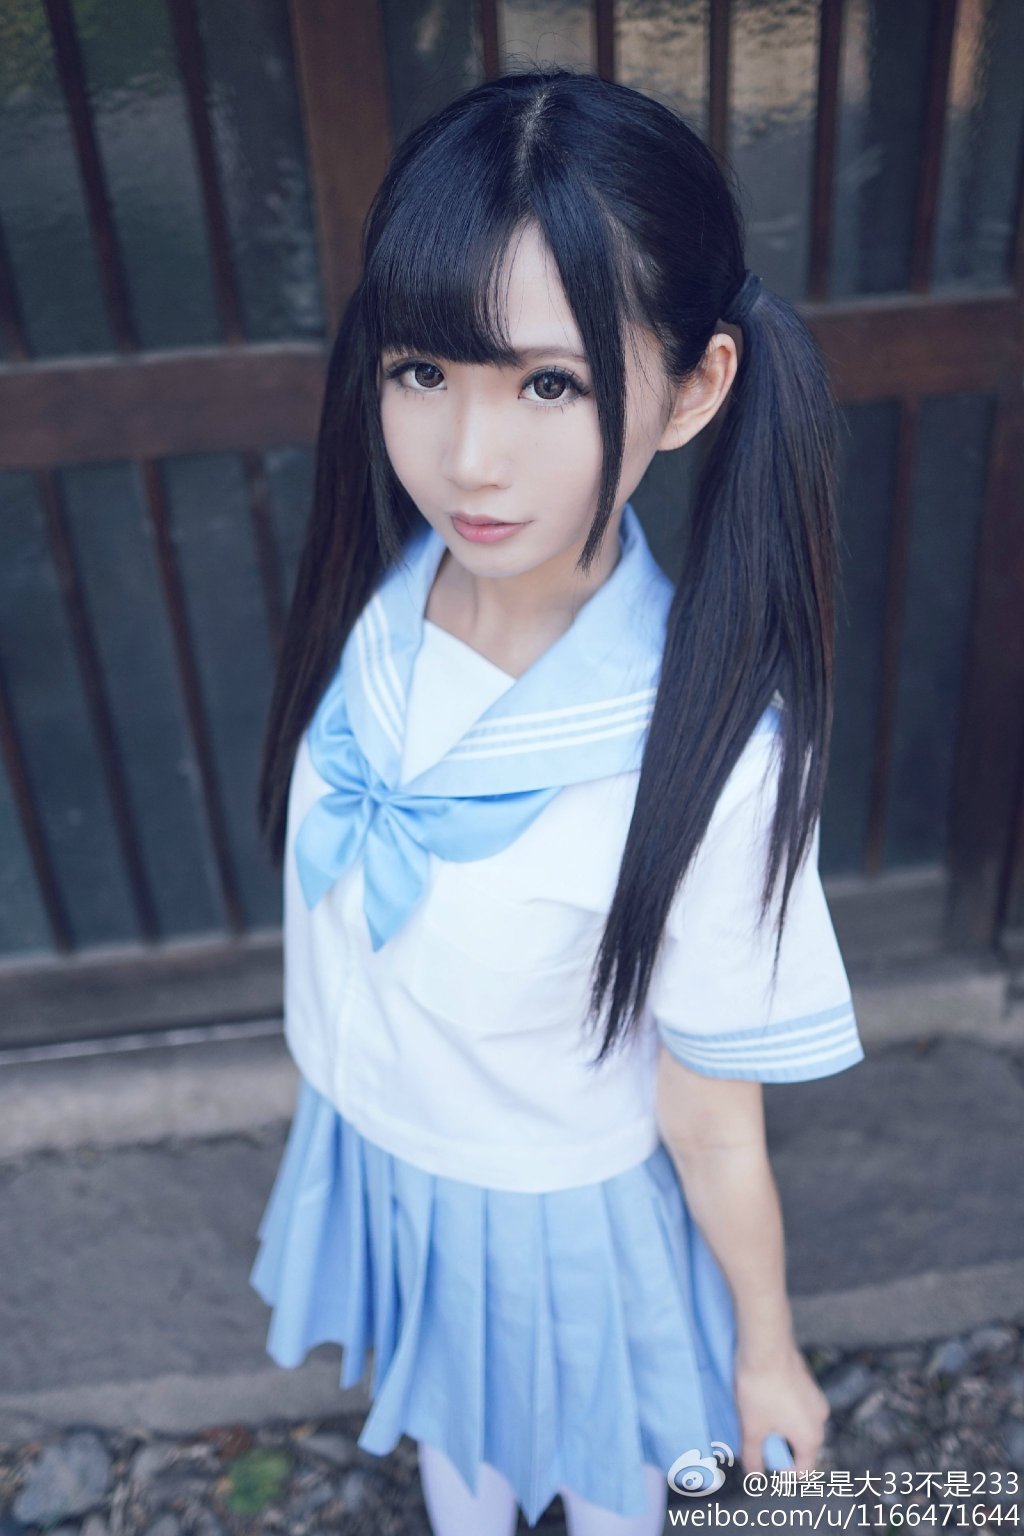 17 Adorable Japanese School Uniforms To Fall In Love With ...